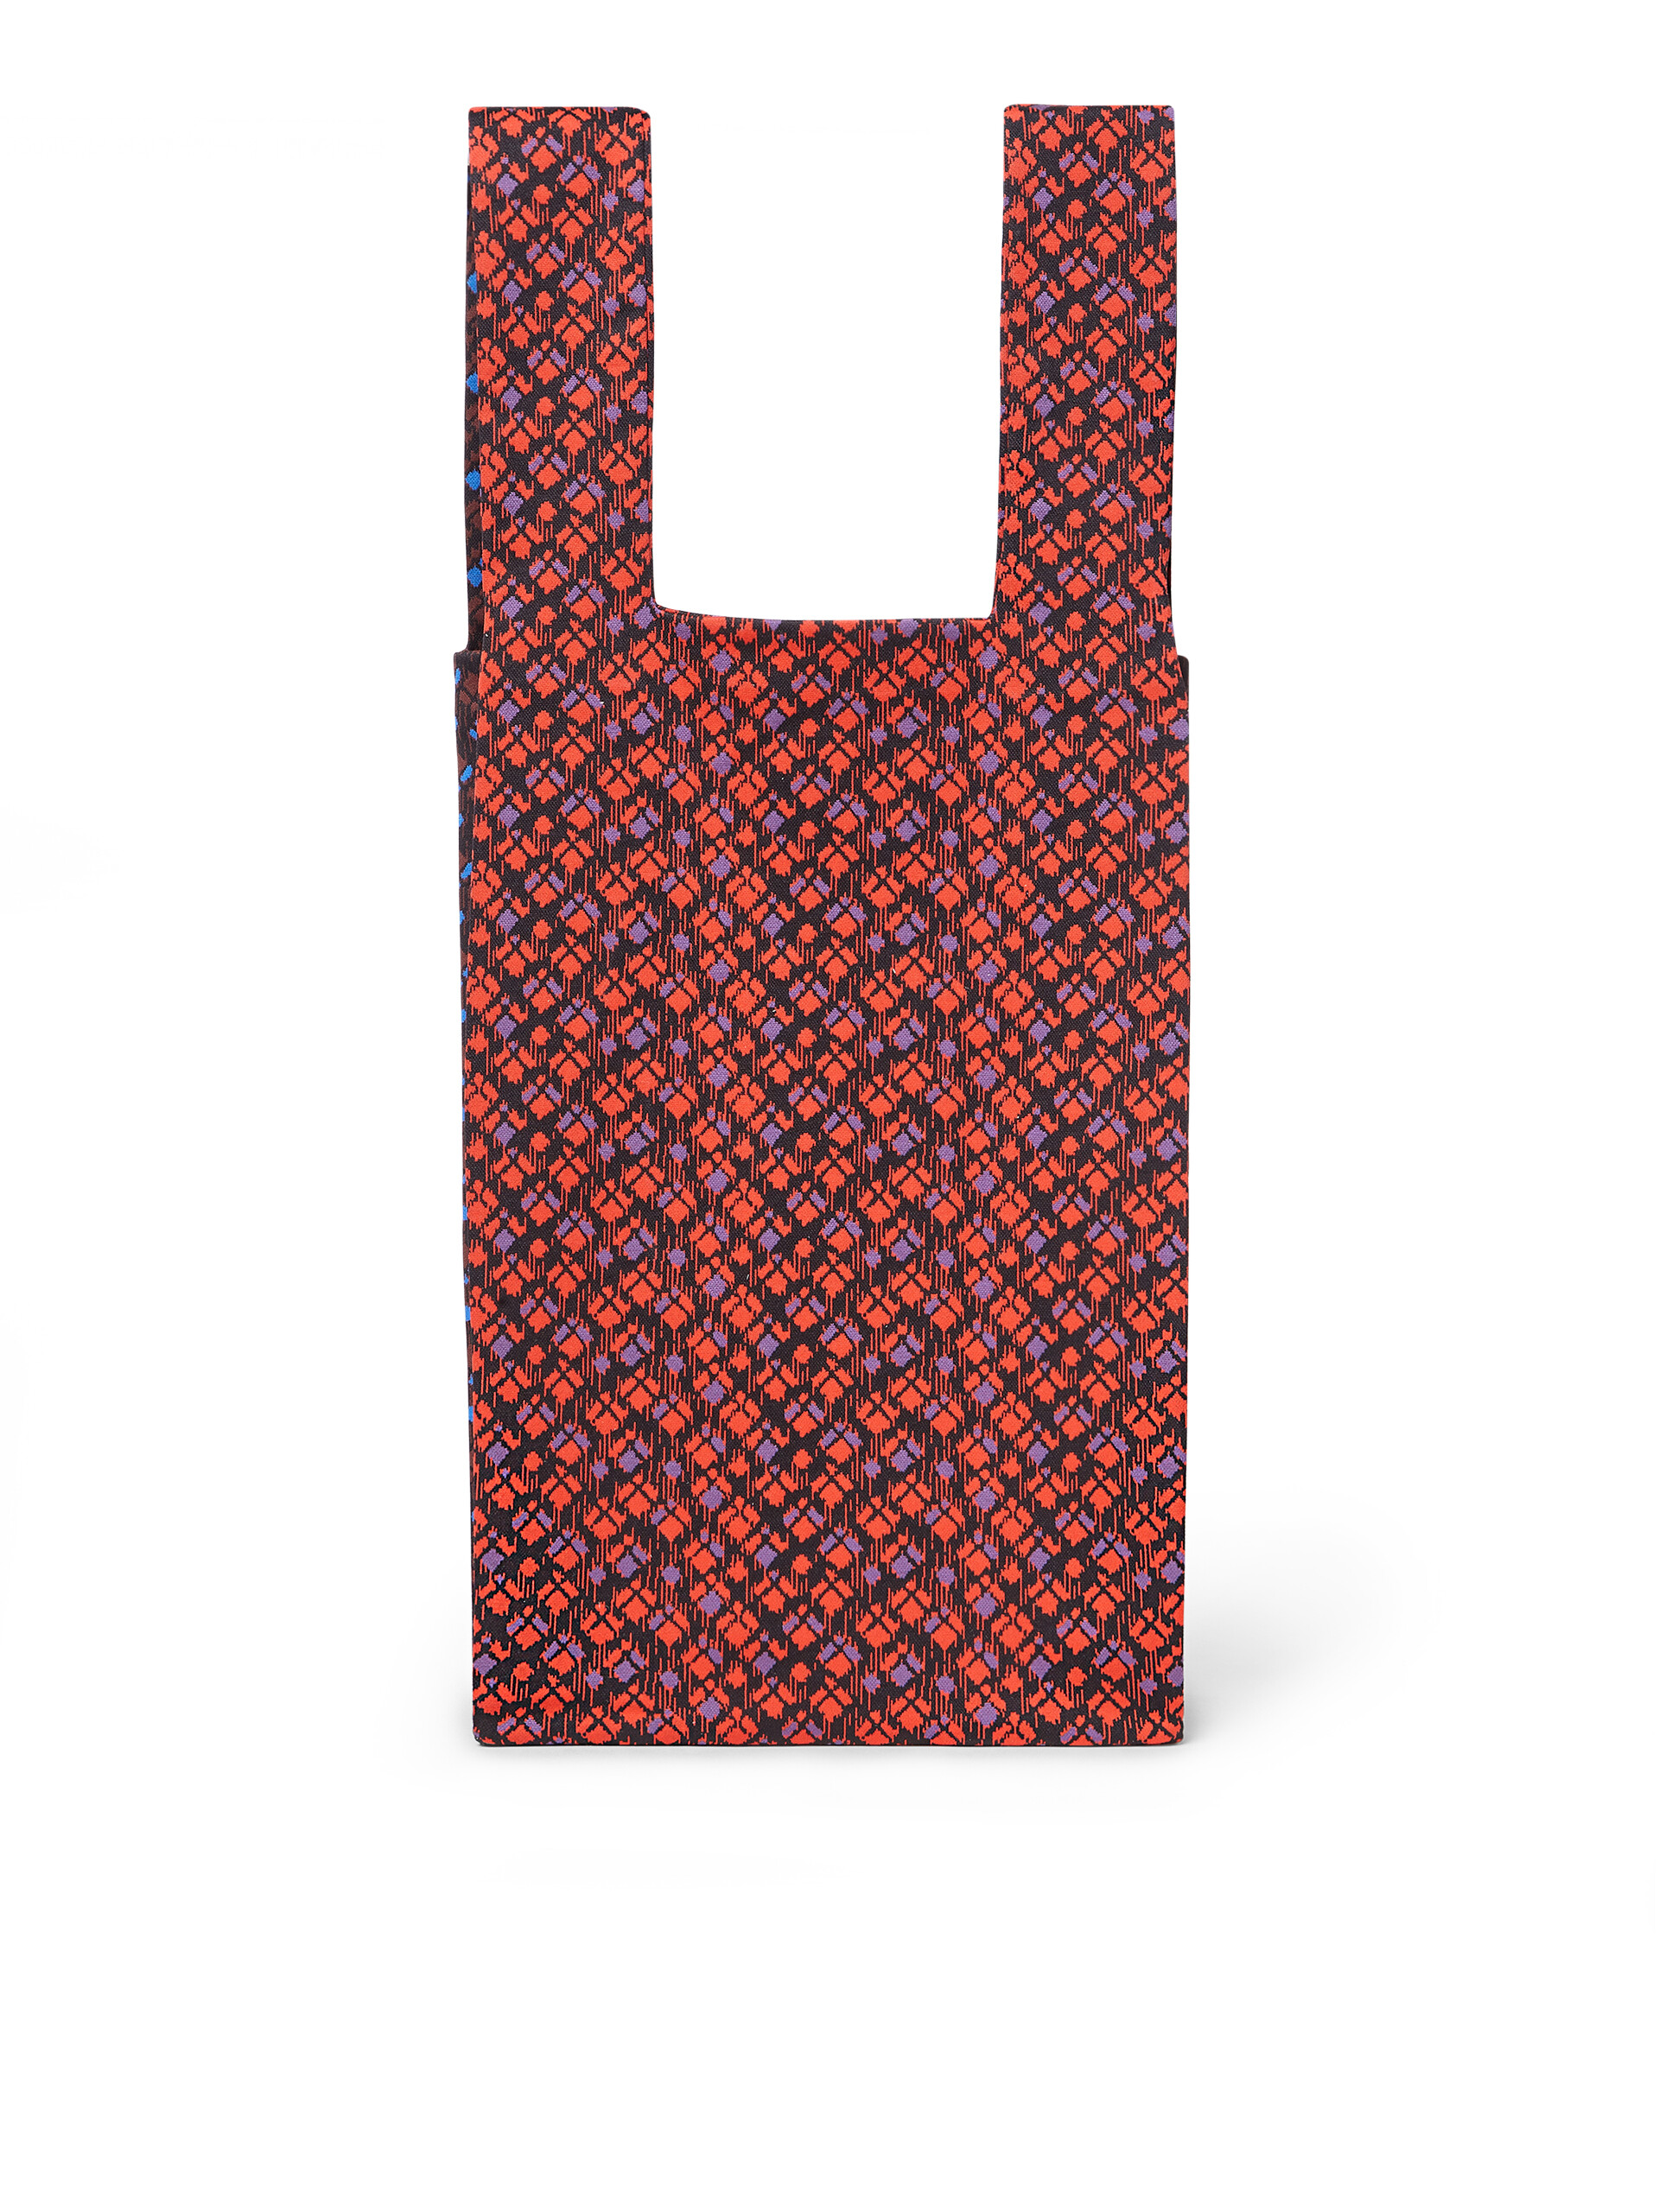 MARNI MARKET shopping bag with multicoloured print - Shopping Bags - Image 3